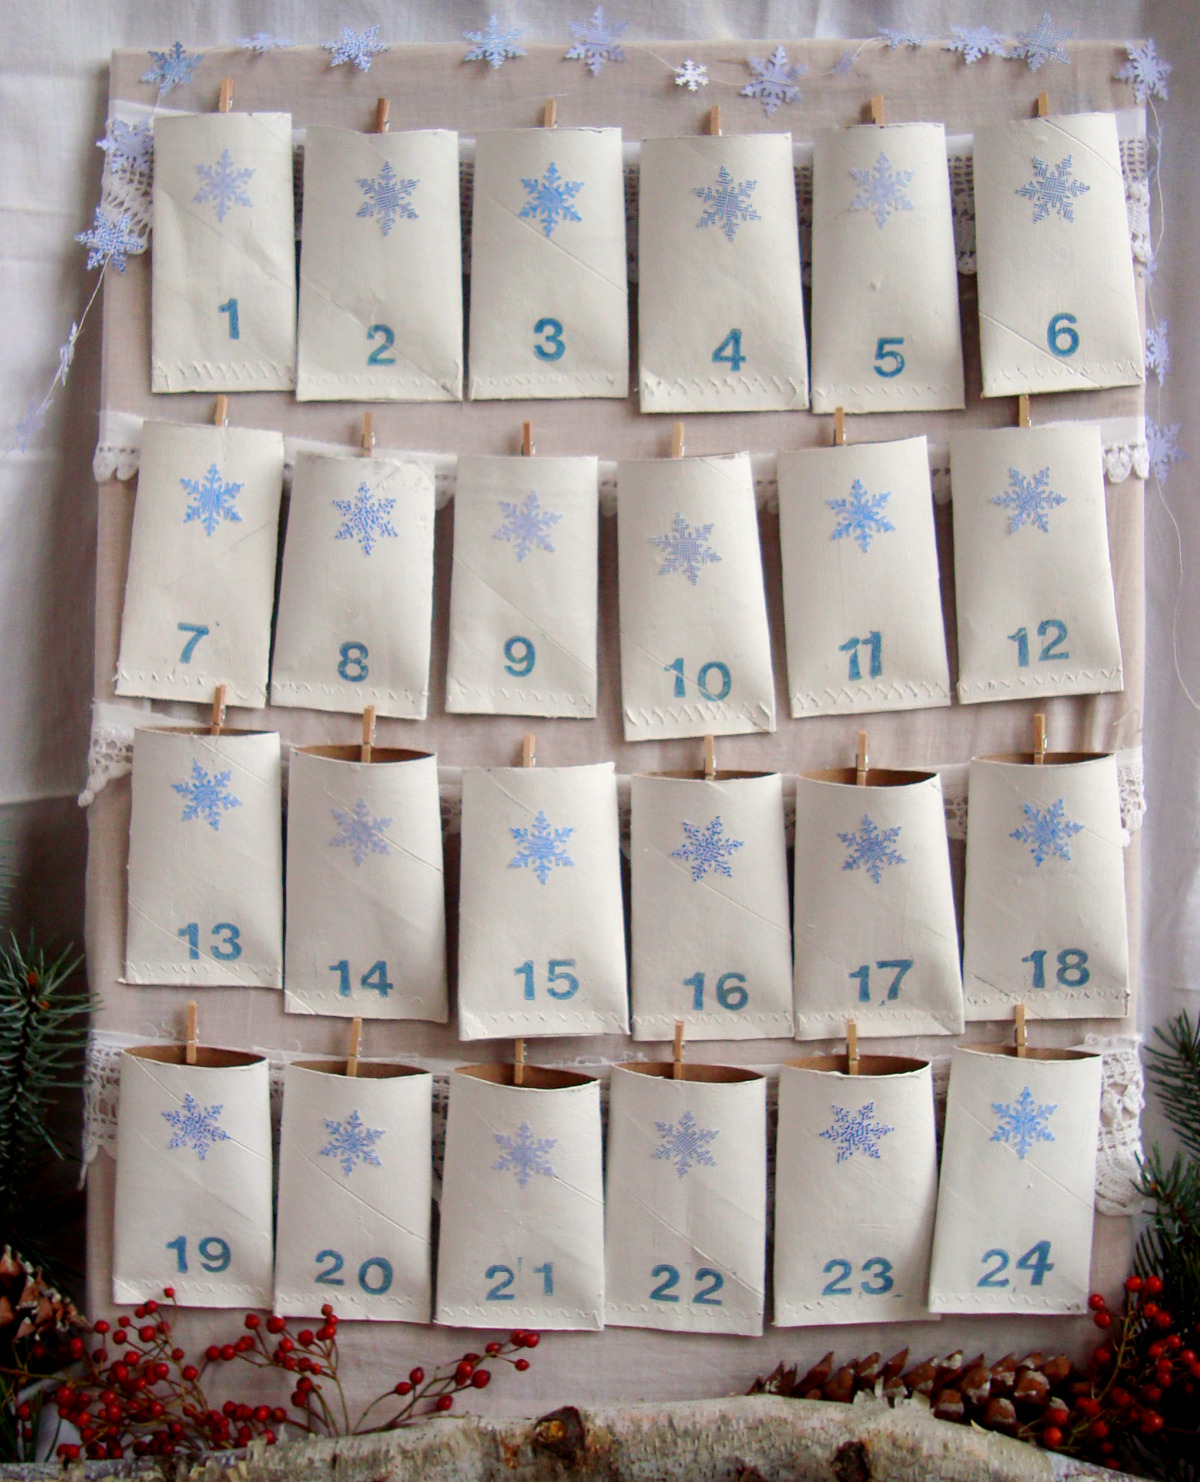 Can advent calendars be recycled along with ordinary cardboard?